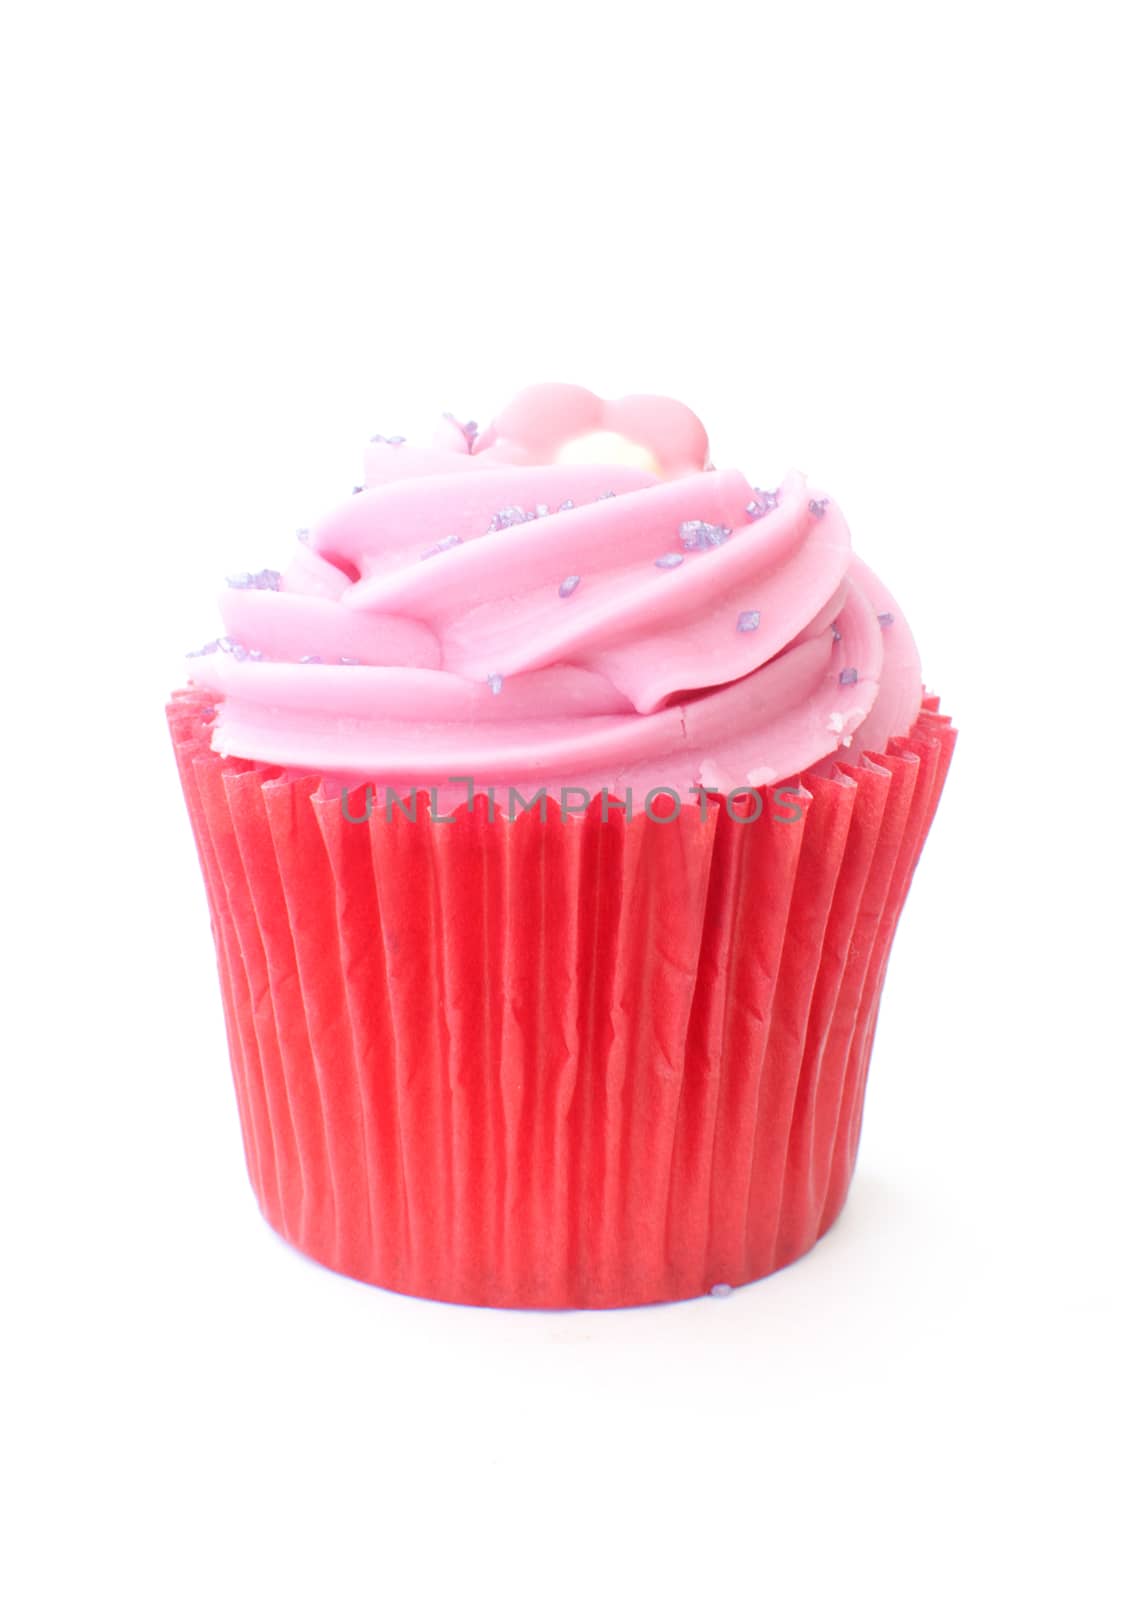 Delicious cupcake on a white background